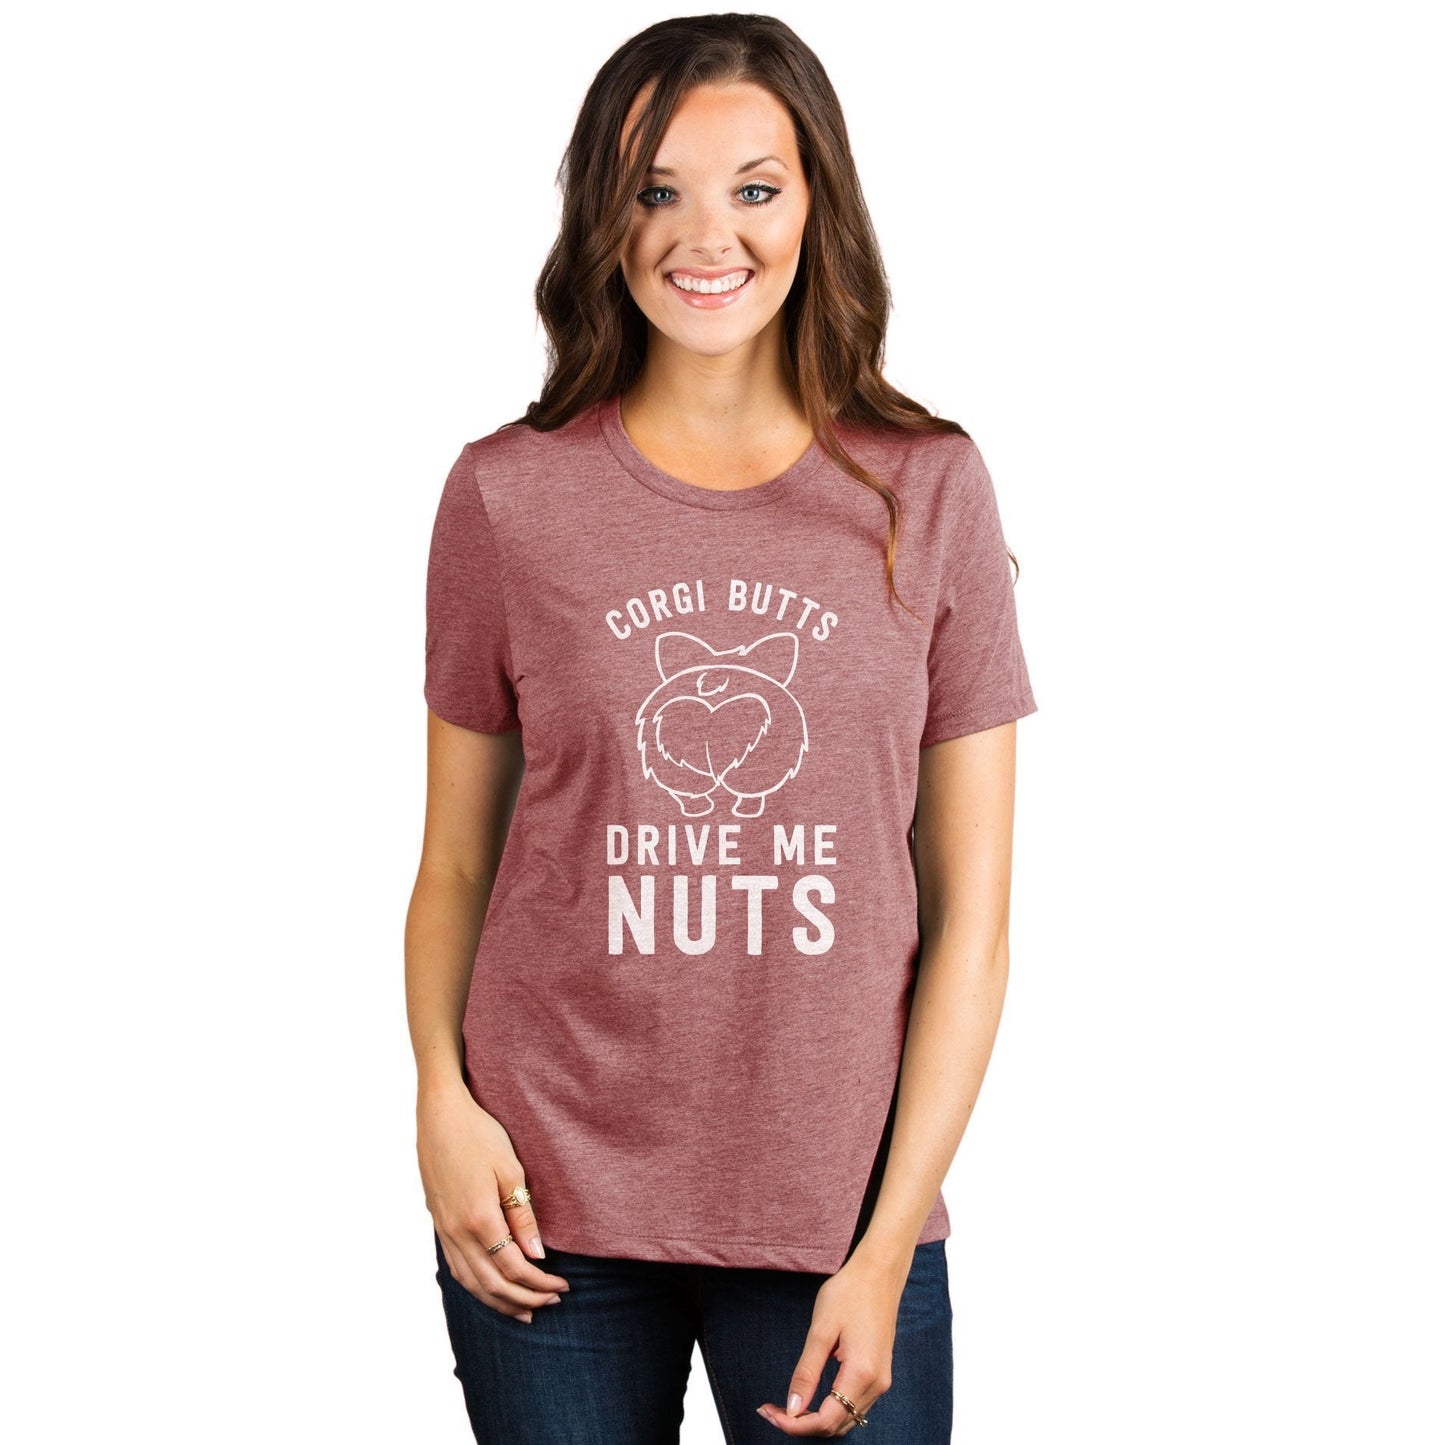 Corgi Butts Drive Me Nutts Women's Relaxed Crewneck T-Shirt Top Tee Heather Rouge Model
